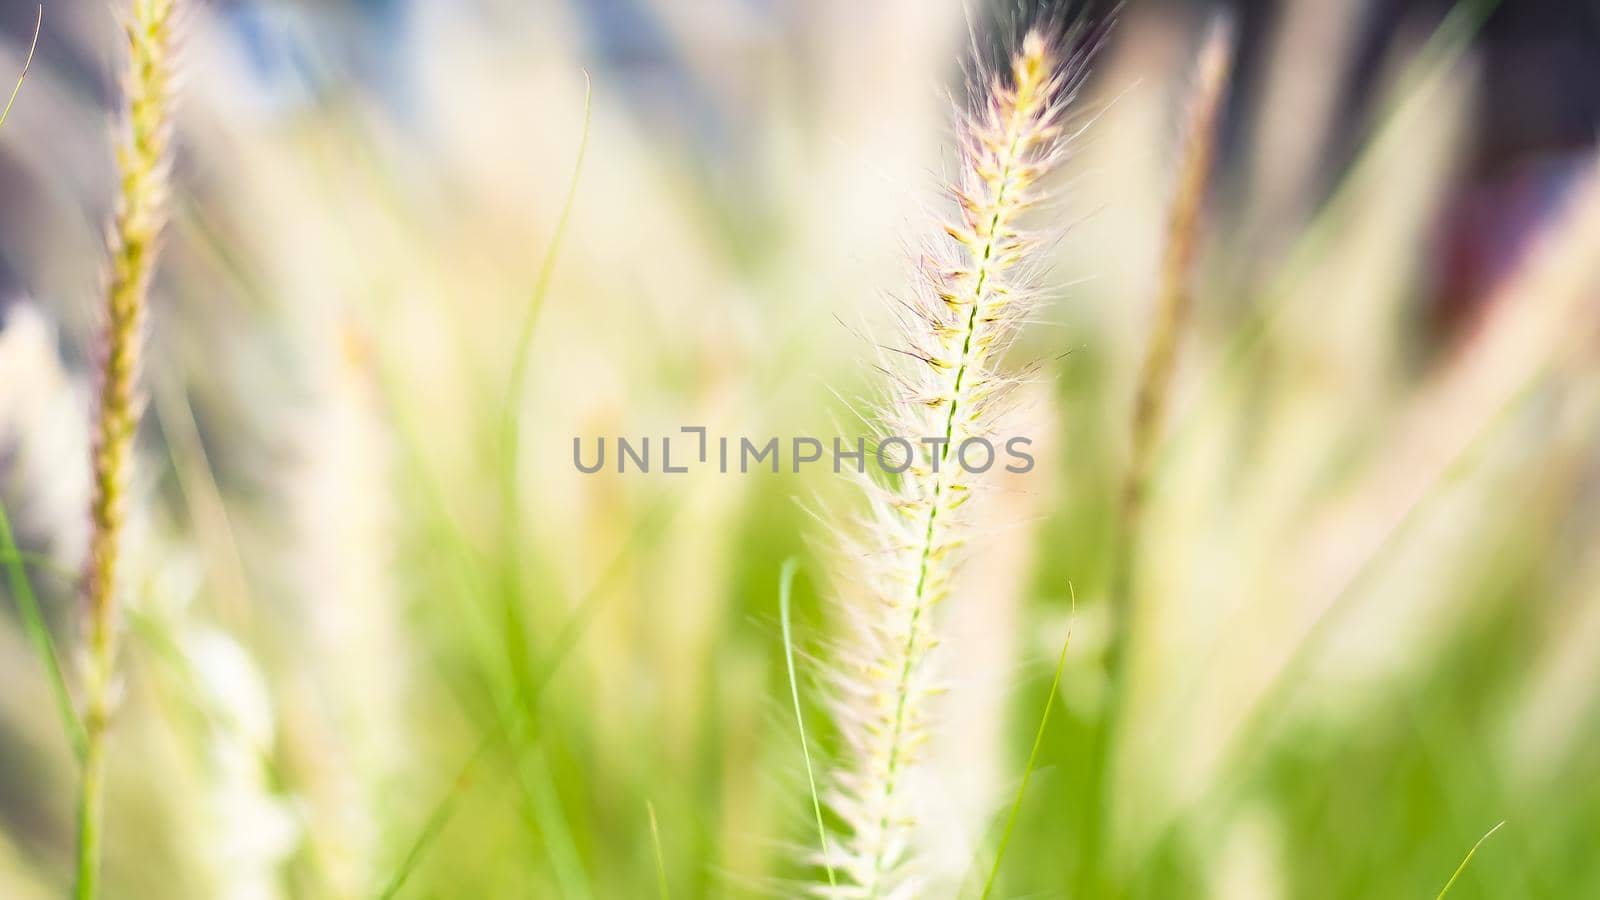 vintage background wild grass flowers, nature beautiful, toning design spring nature, sun plants by Petrichor